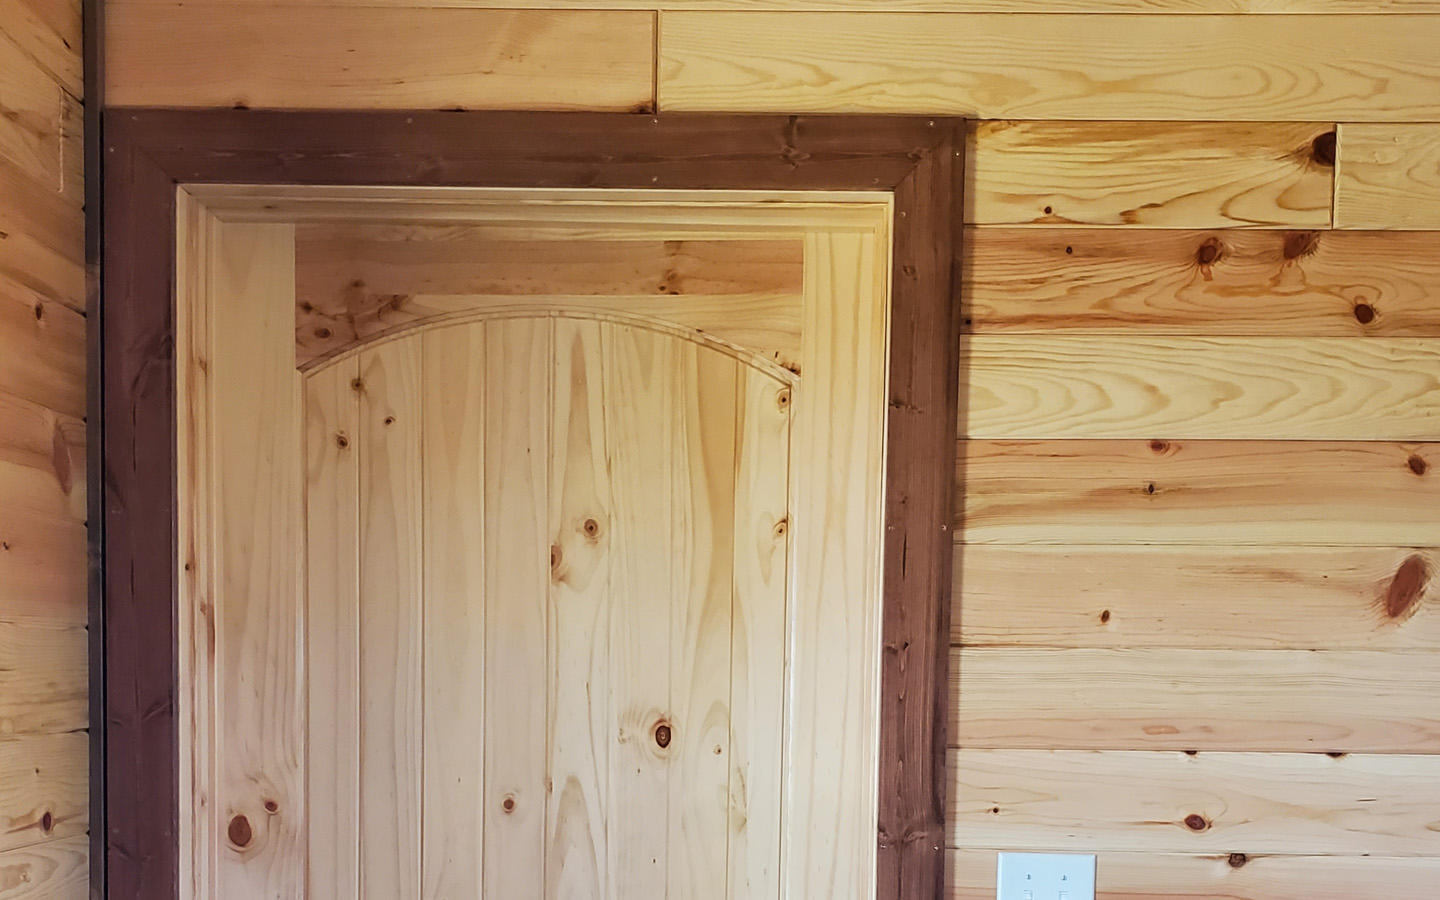 Leland's cabins, craftsmanship and quality, site prep